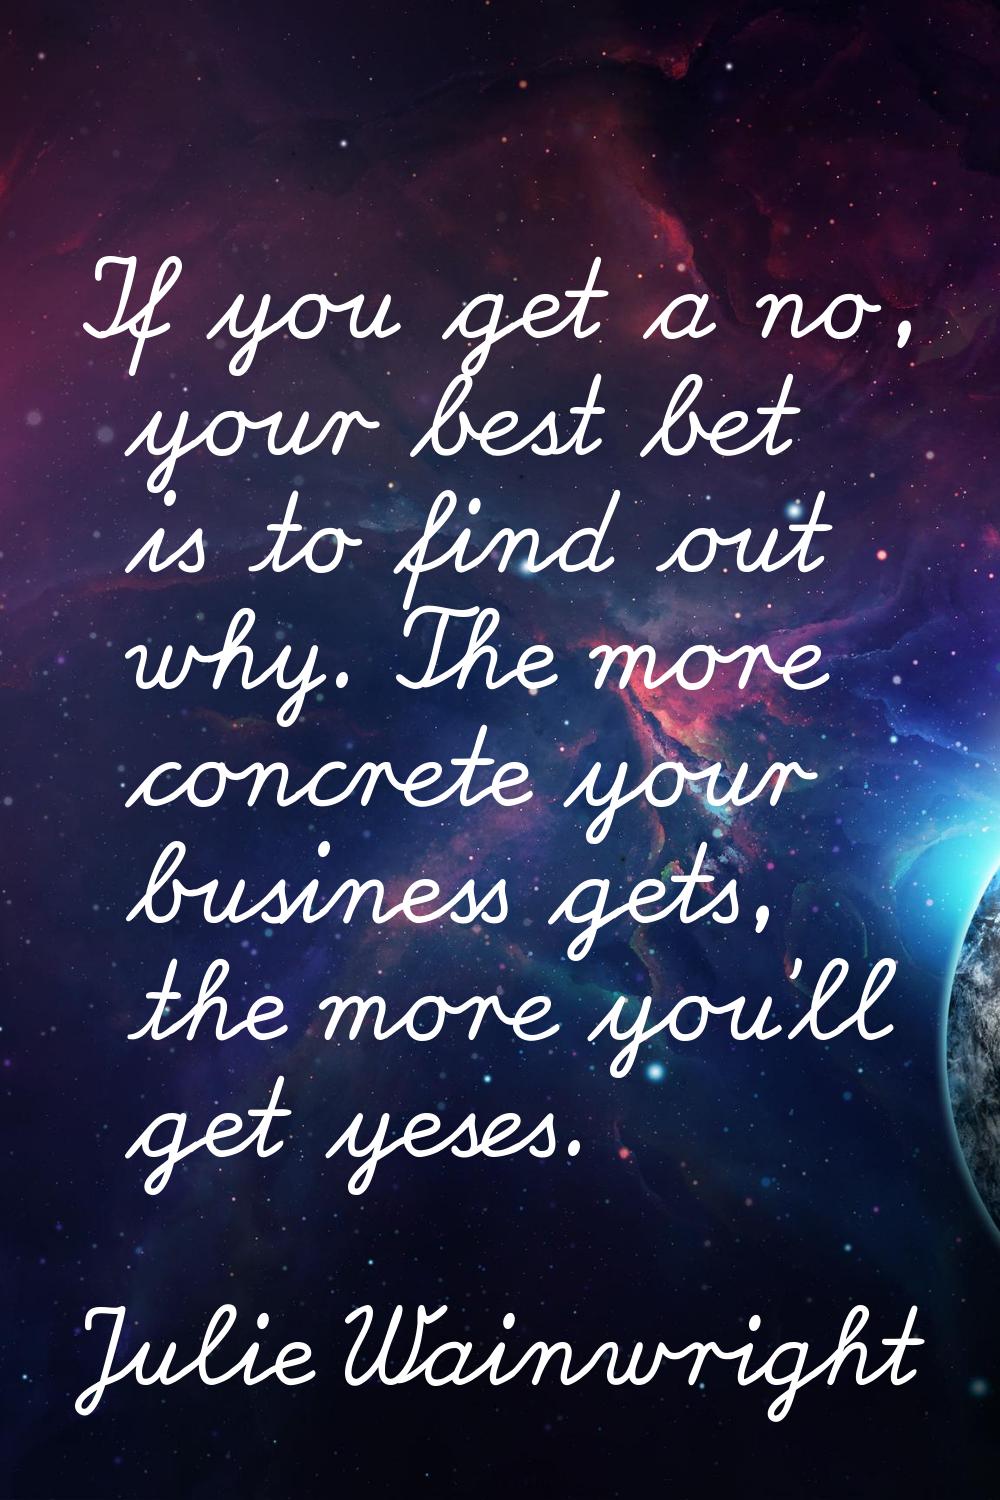 If you get a no, your best bet is to find out why. The more concrete your business gets, the more y